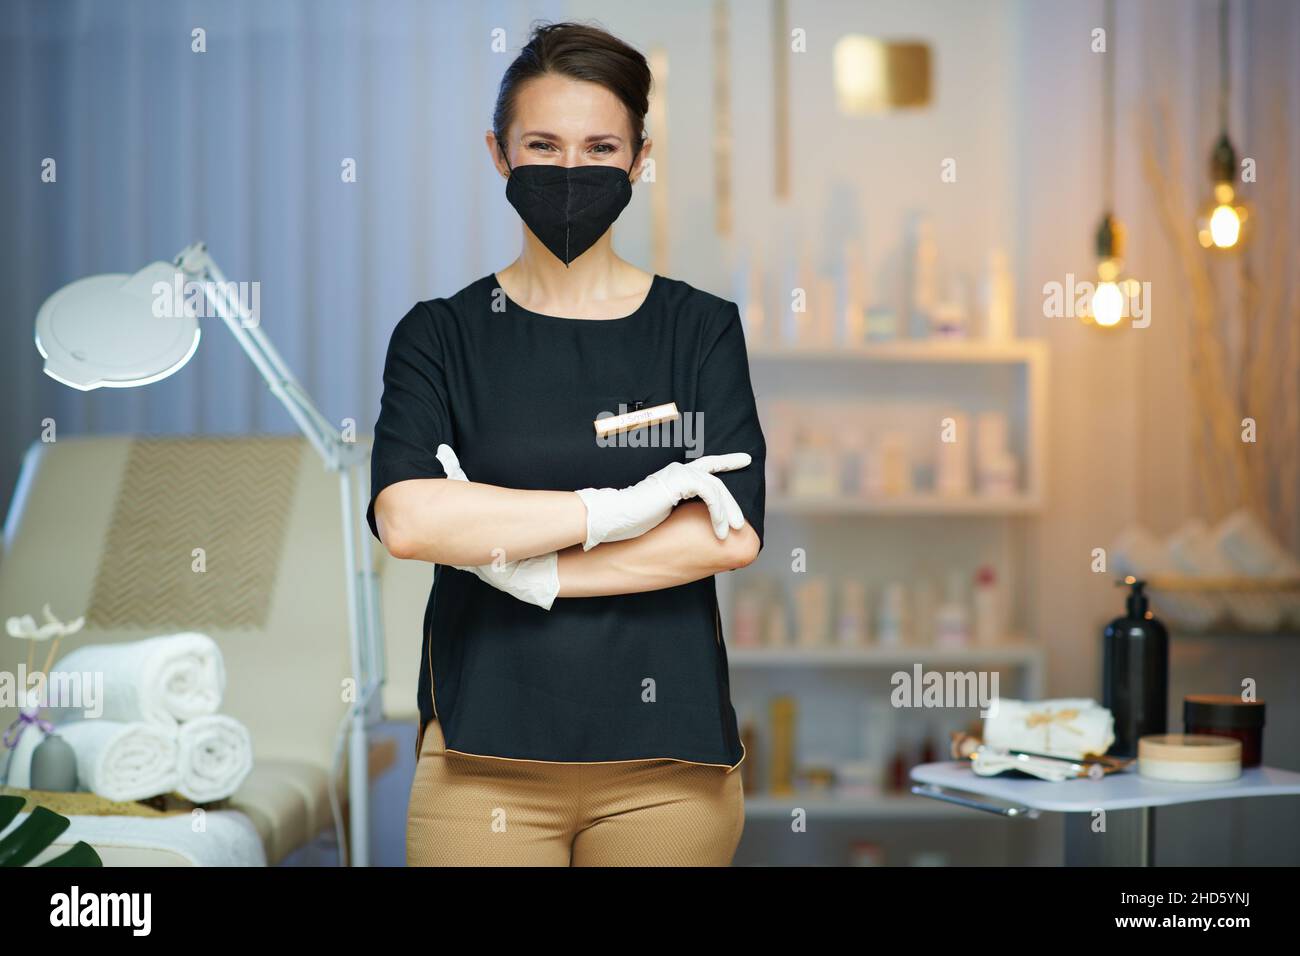 Business during covid-19 pandemic. Portrait of 40 years old woman worker with ffp2 mask in modern beauty studio. Stock Photo